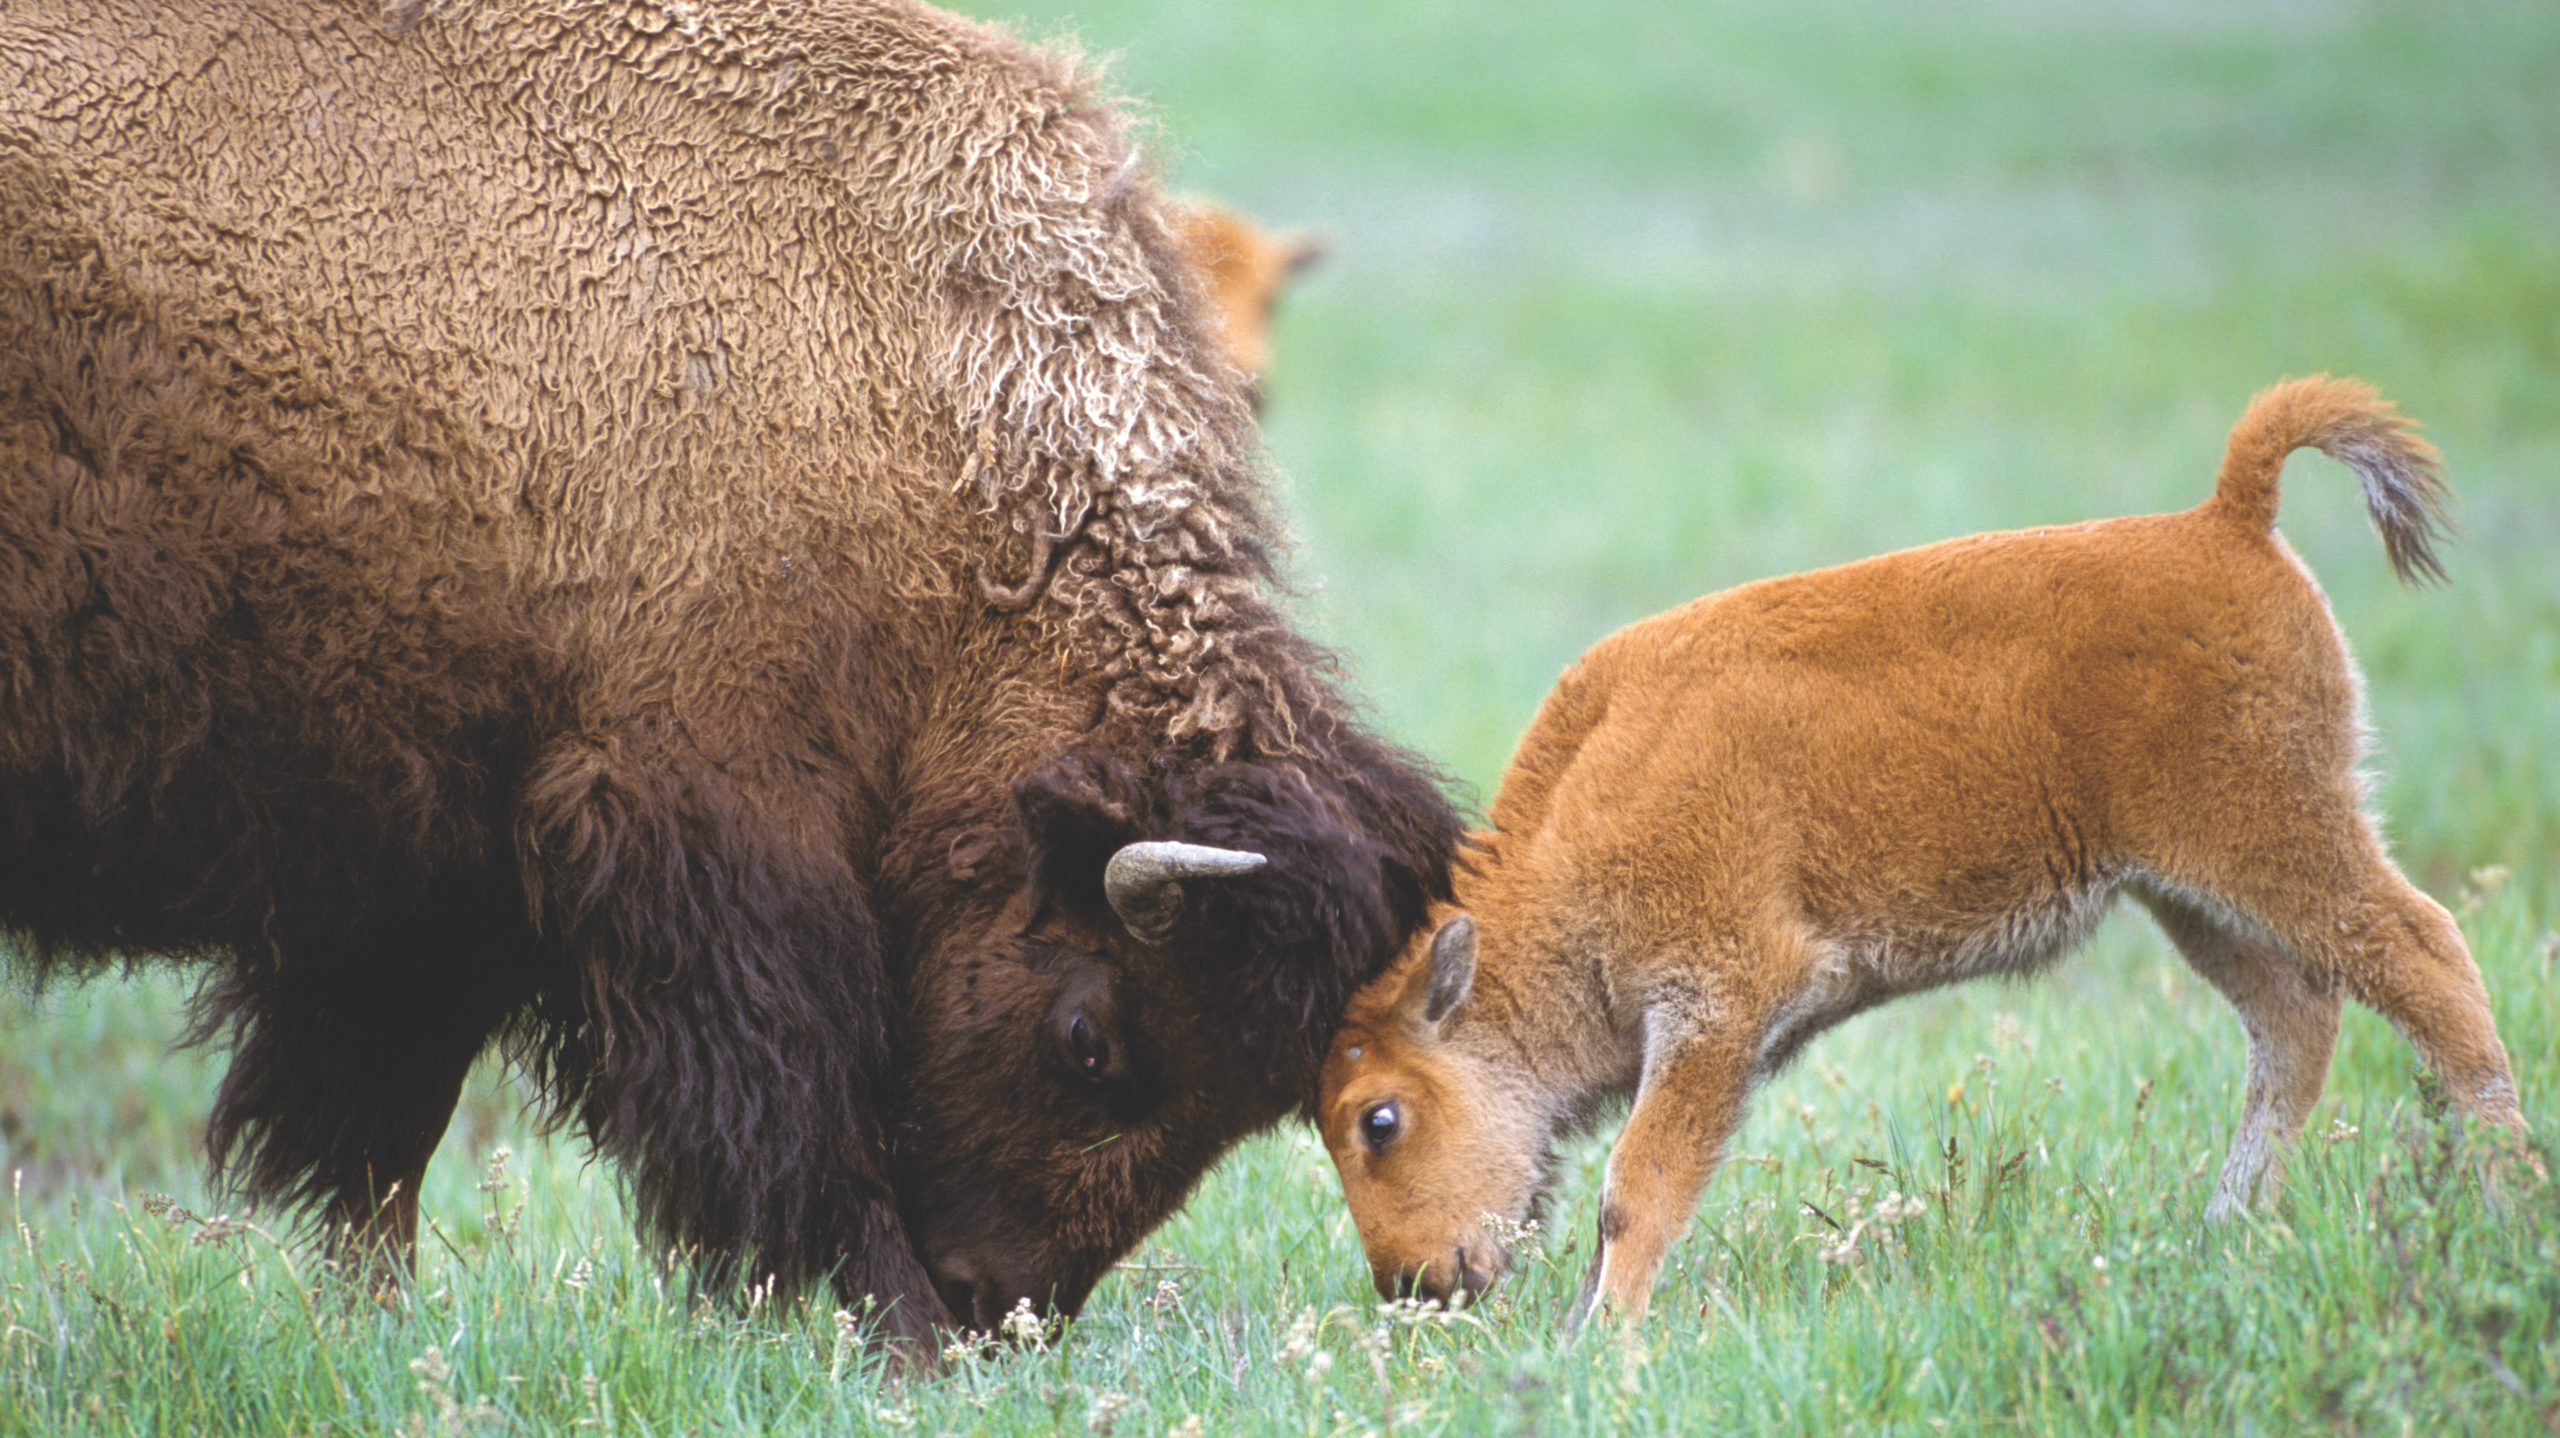 A mother bison plays with her baby at Yellowstone National Park in Montana. (Photo: Suzi Eszterhas/New On Earth: Baby Animals in the Wild/courtesy of Earth Aware Editions)